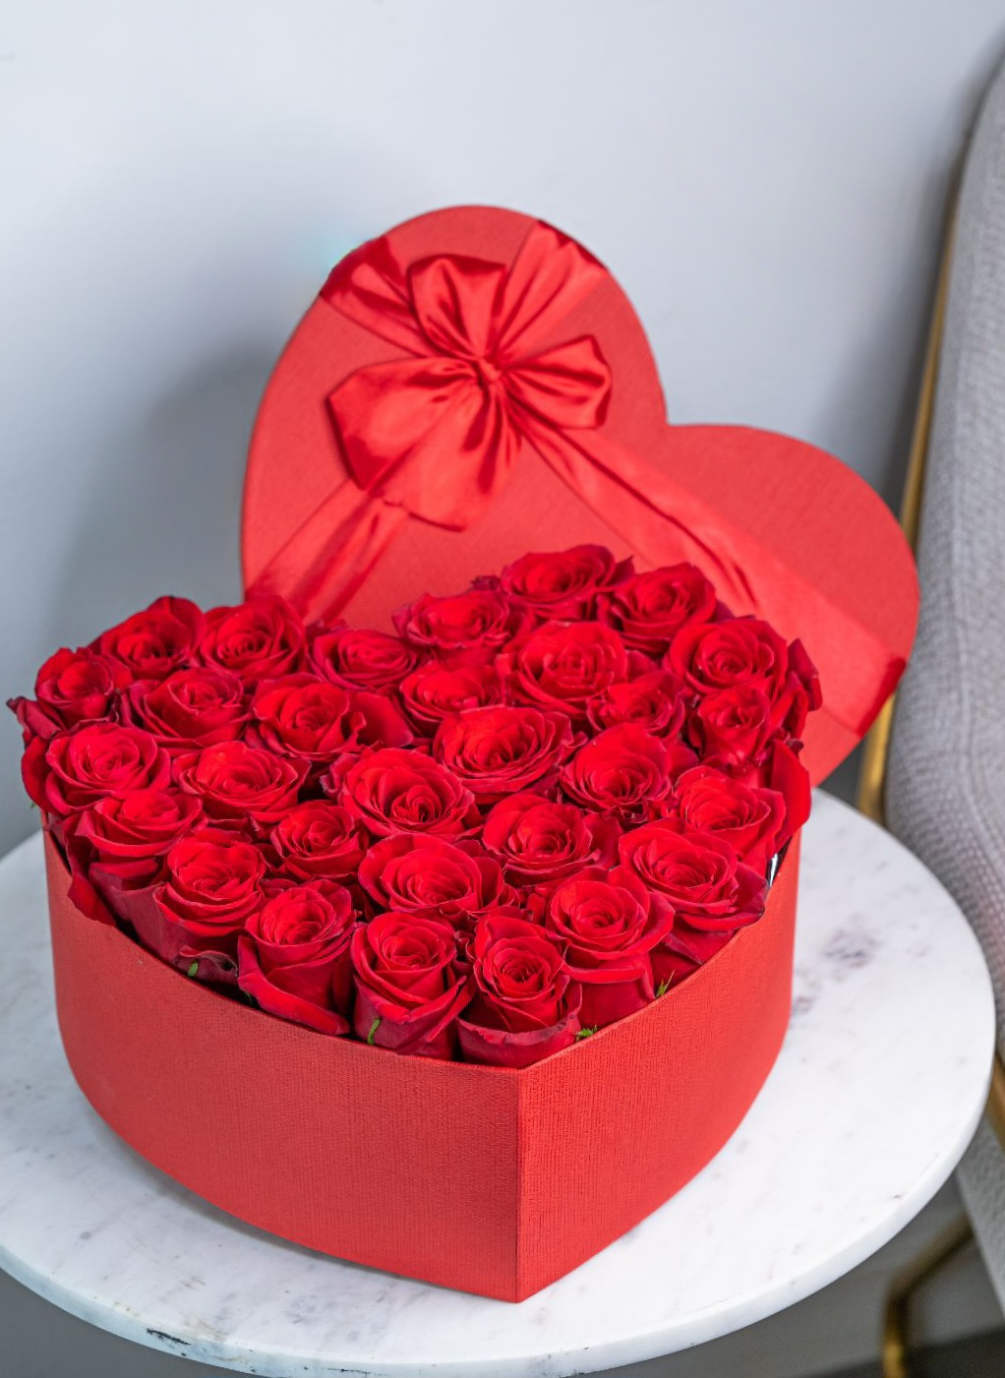 Flowers in a box is a romantic gift for any celebration. Such